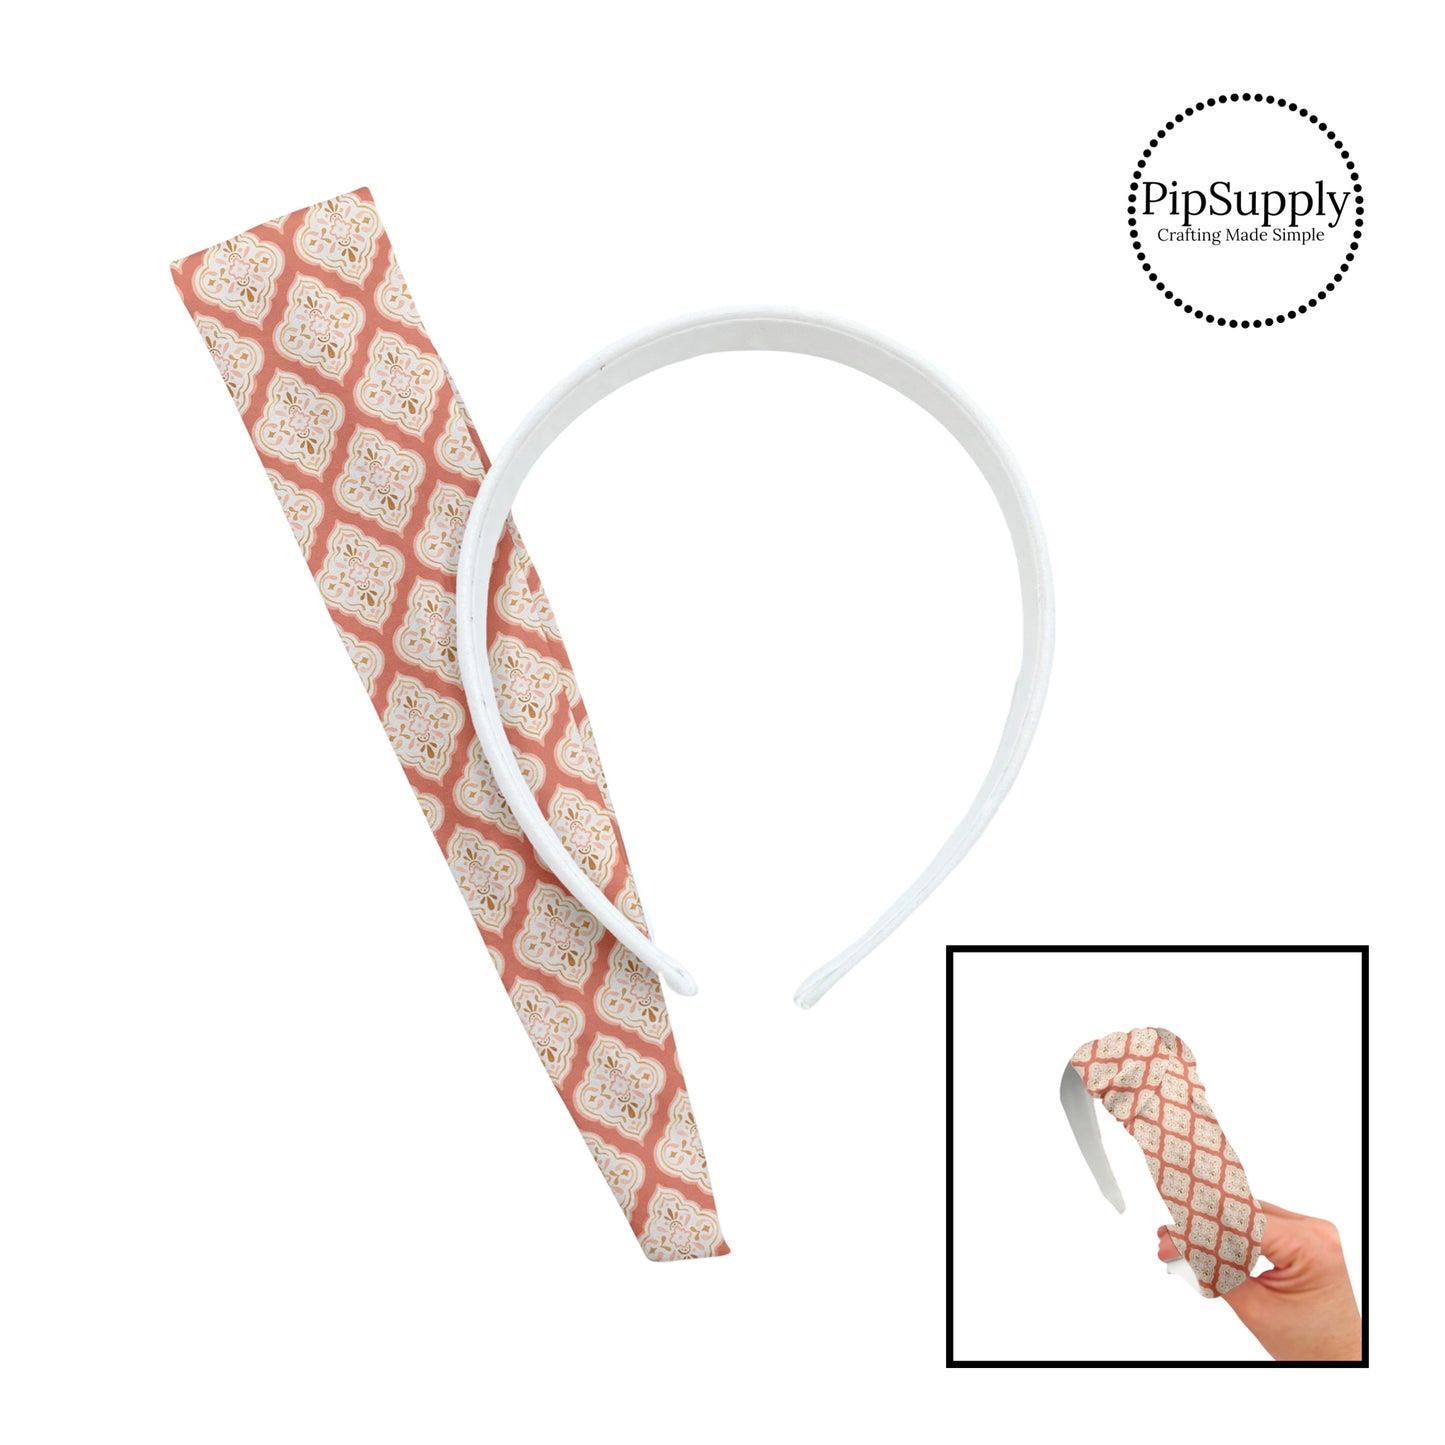 These boho pattern themed headband kits are easy to assemble and come with everything you need to make your own knotted headband. These pattern kits include a custom printed and sewn fabric strip and a coordinating headband. The headband kits features salmon boho medallion pattern.